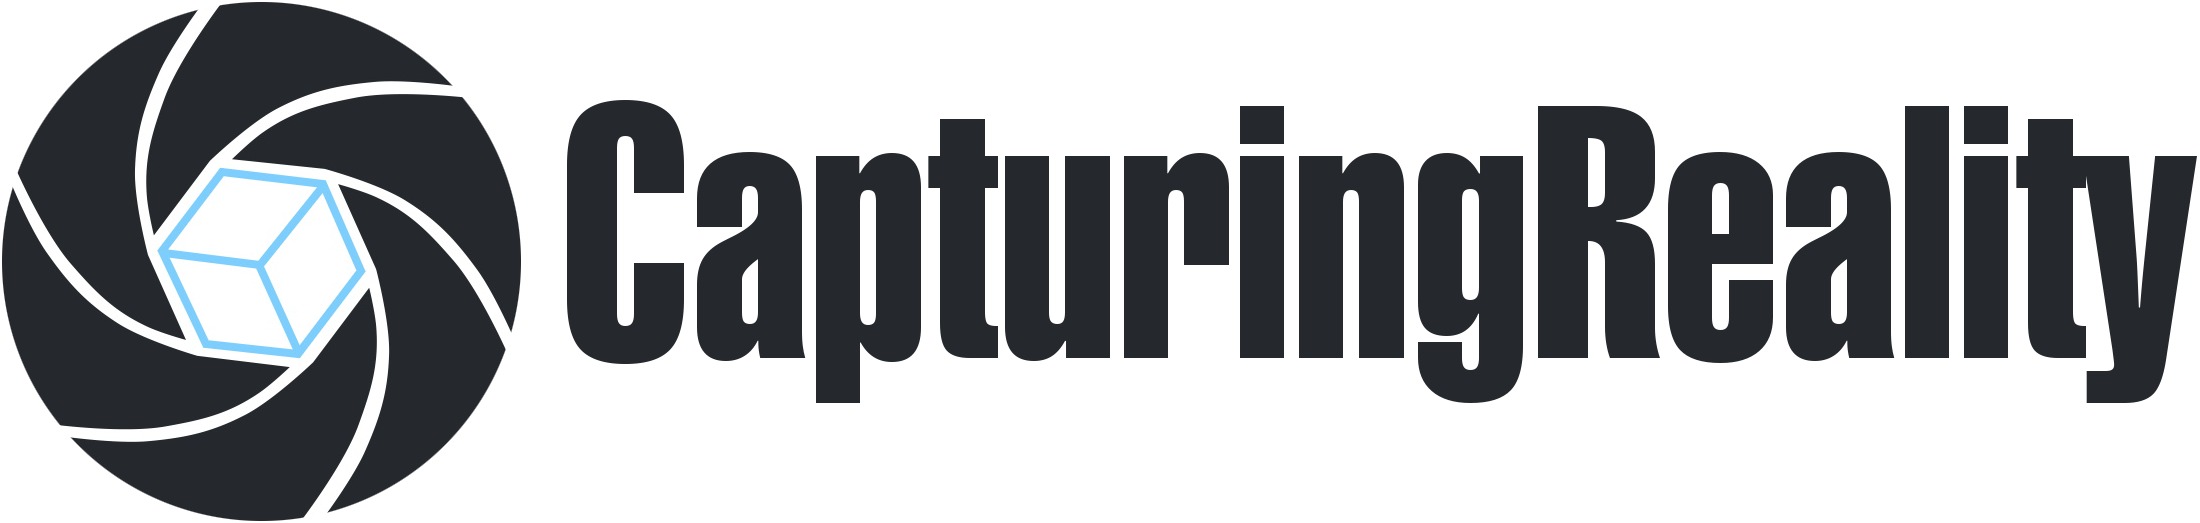 CapturingReality Logo (all rights to this image belong to CapturingReality, makers of RealityCapture)